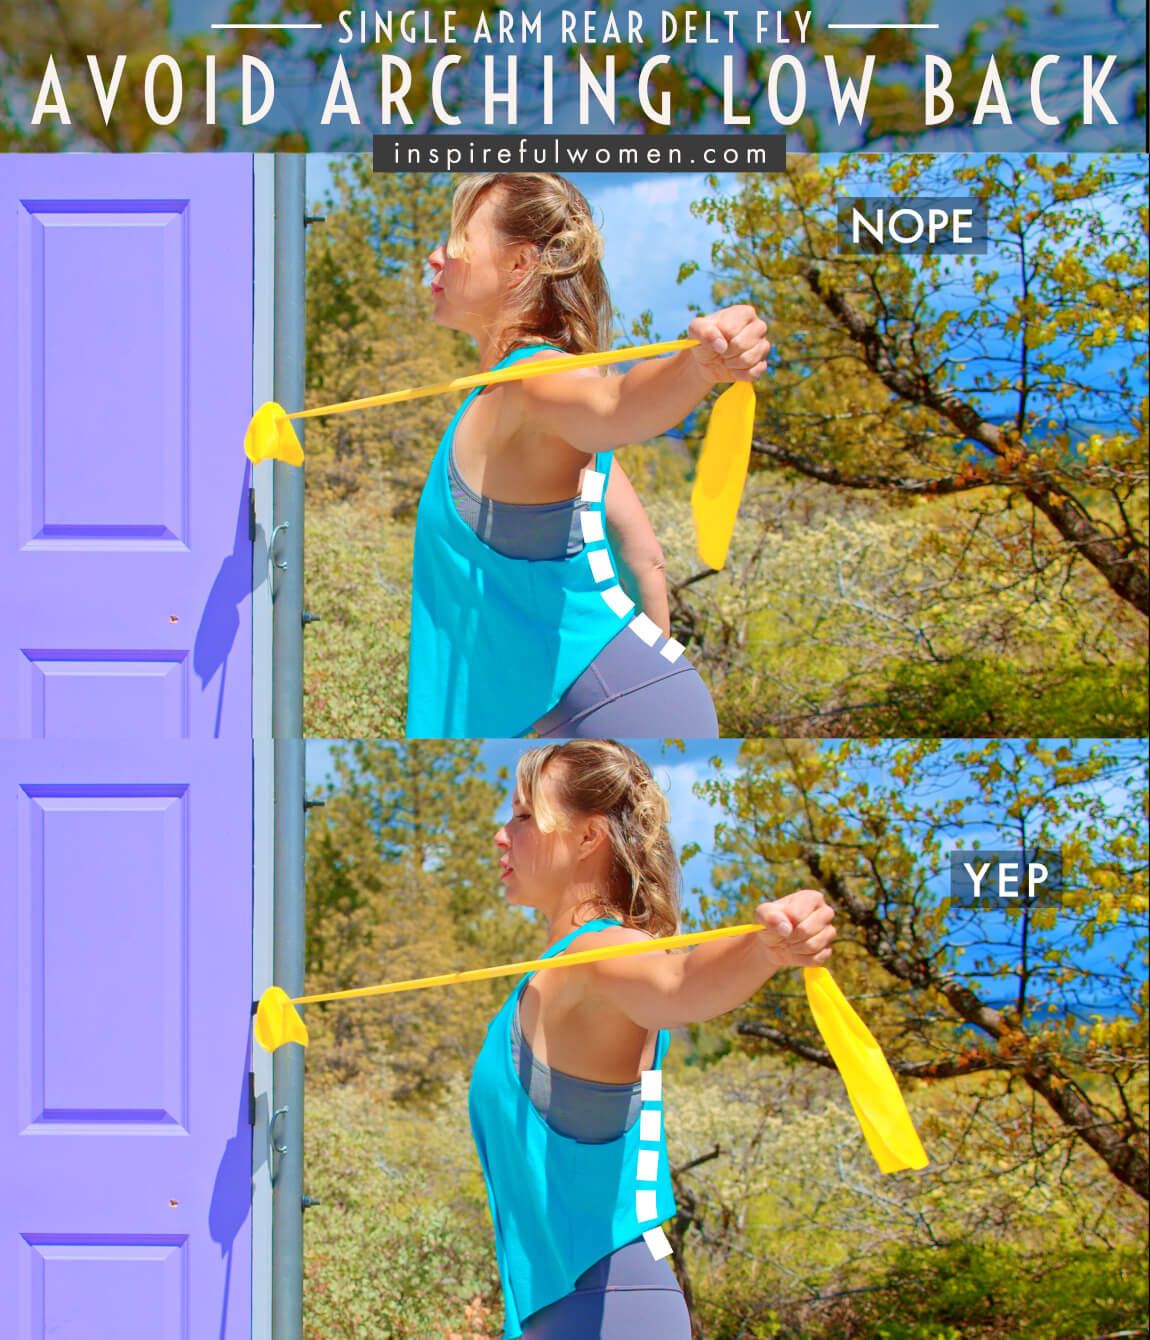 avoid-arching-low-back-one-arm-standing-rear-deltoid-fly-wall-anchored-common-mistakes